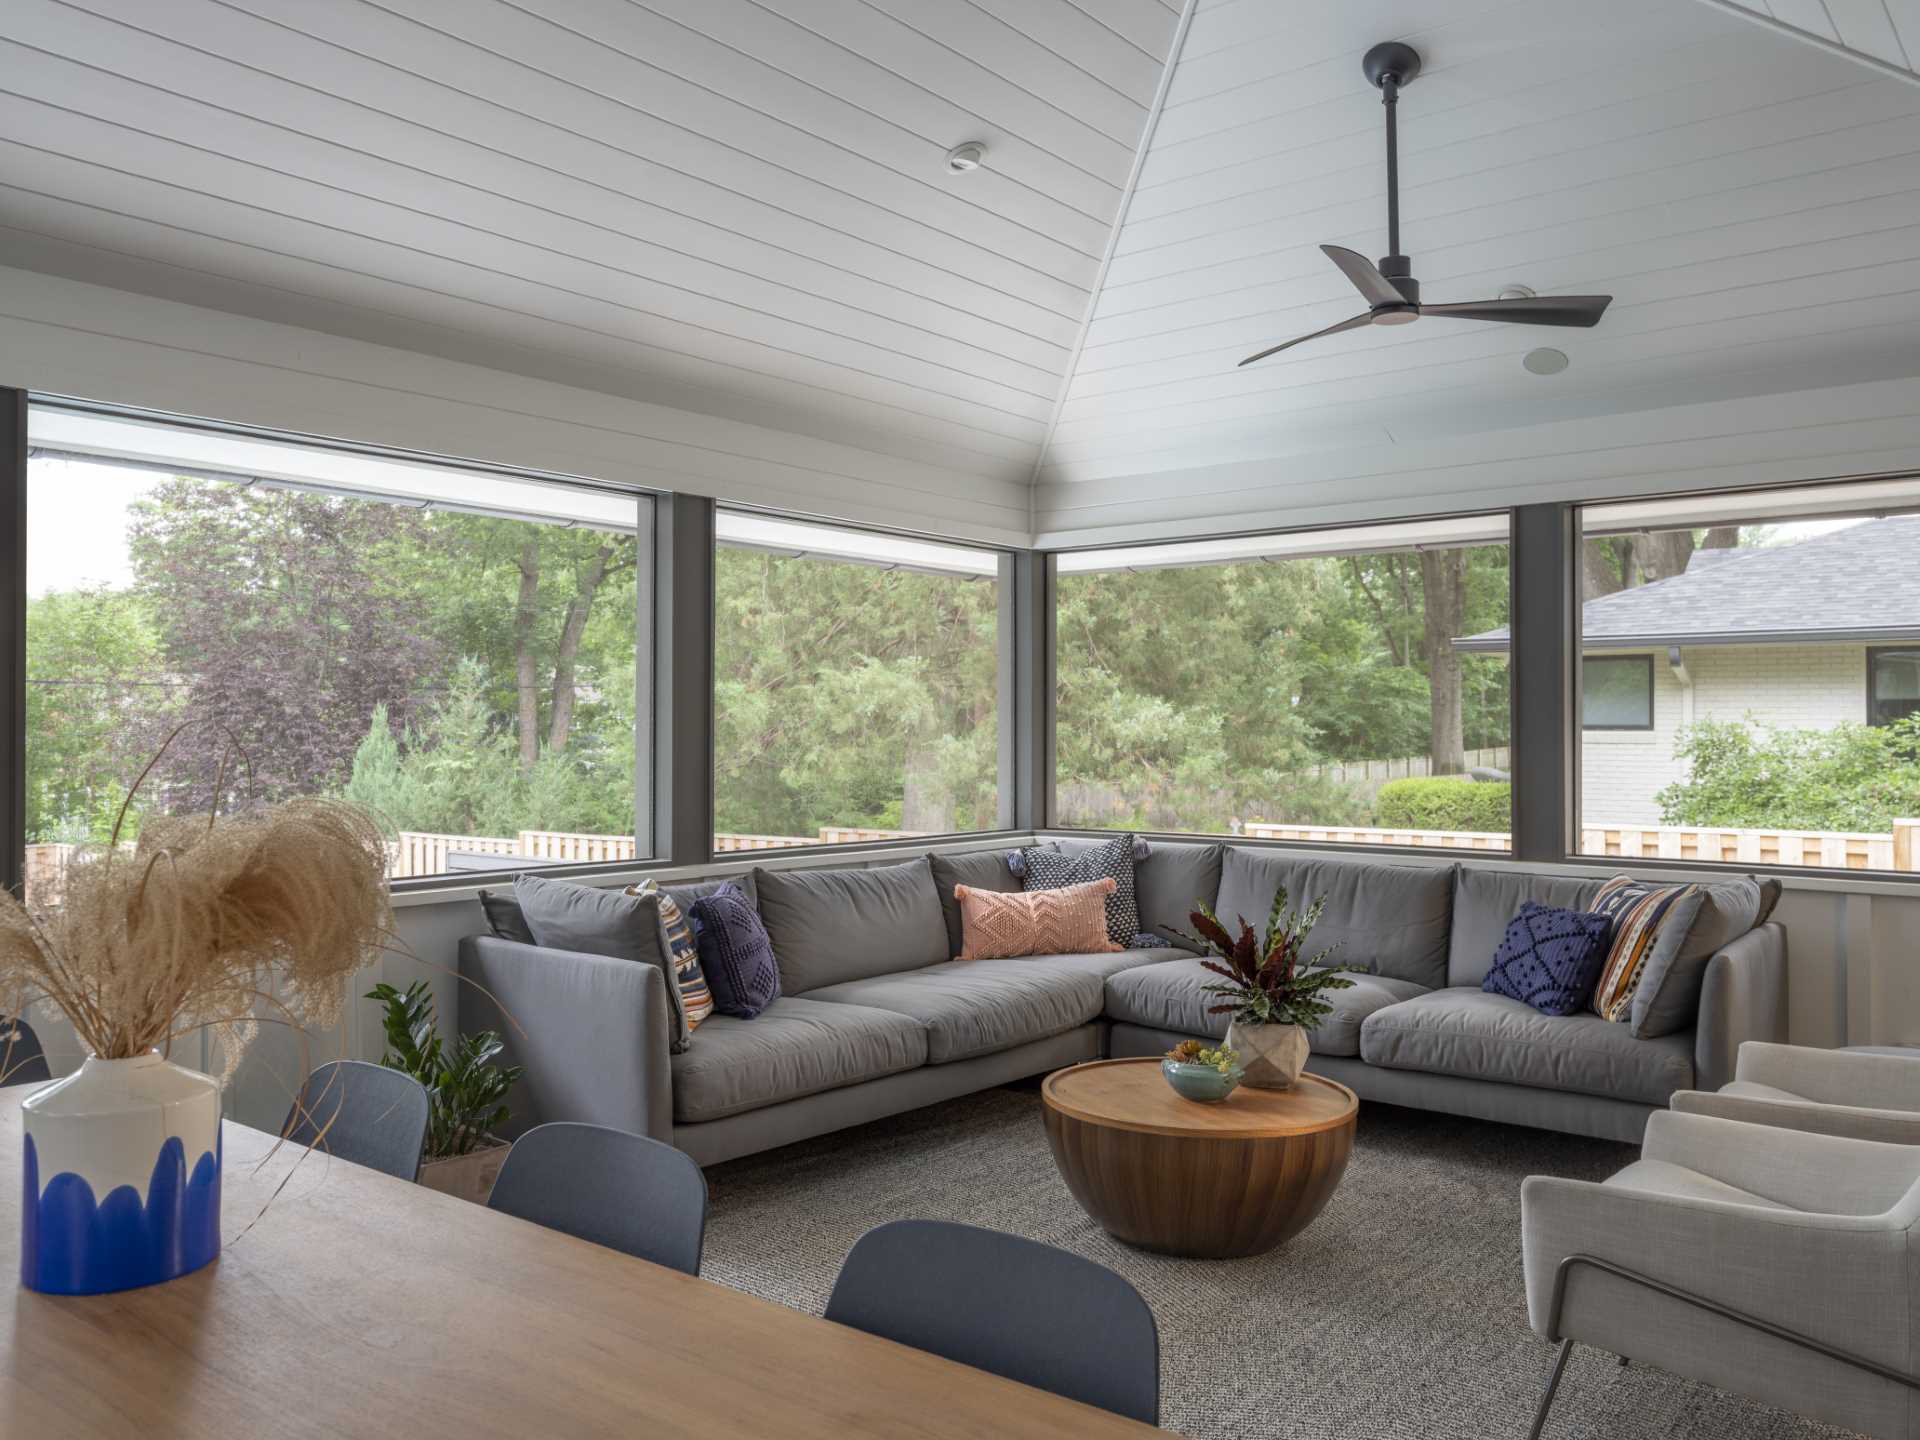 This contemporary home has a screened-in porch with a secondary dining and living area.